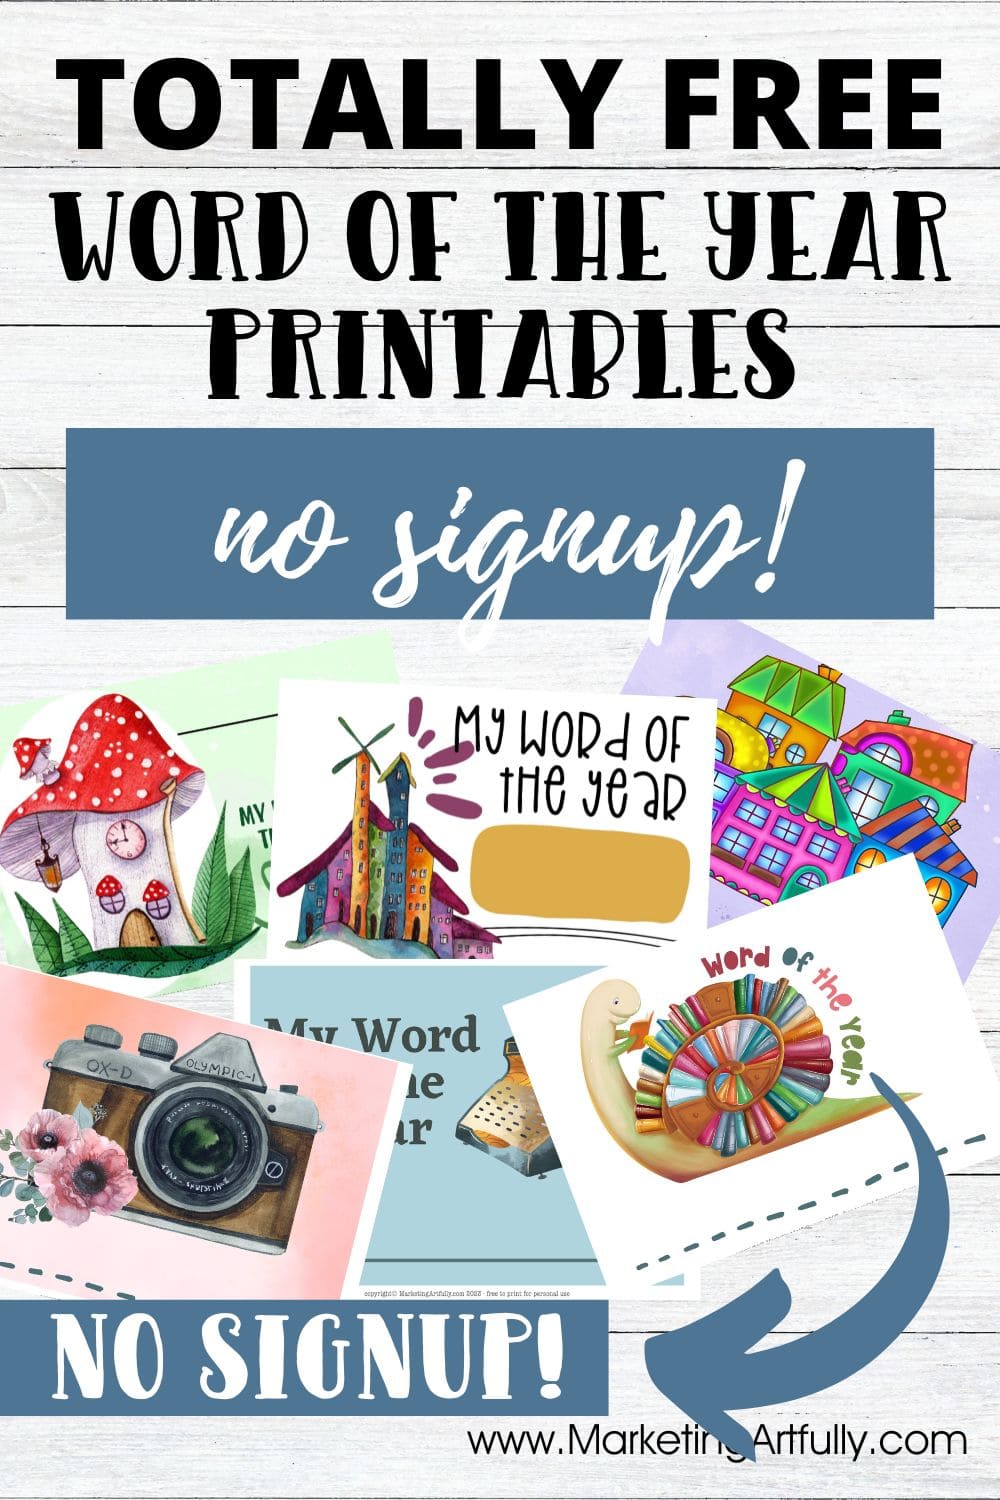 Free Word of The Year Printables
